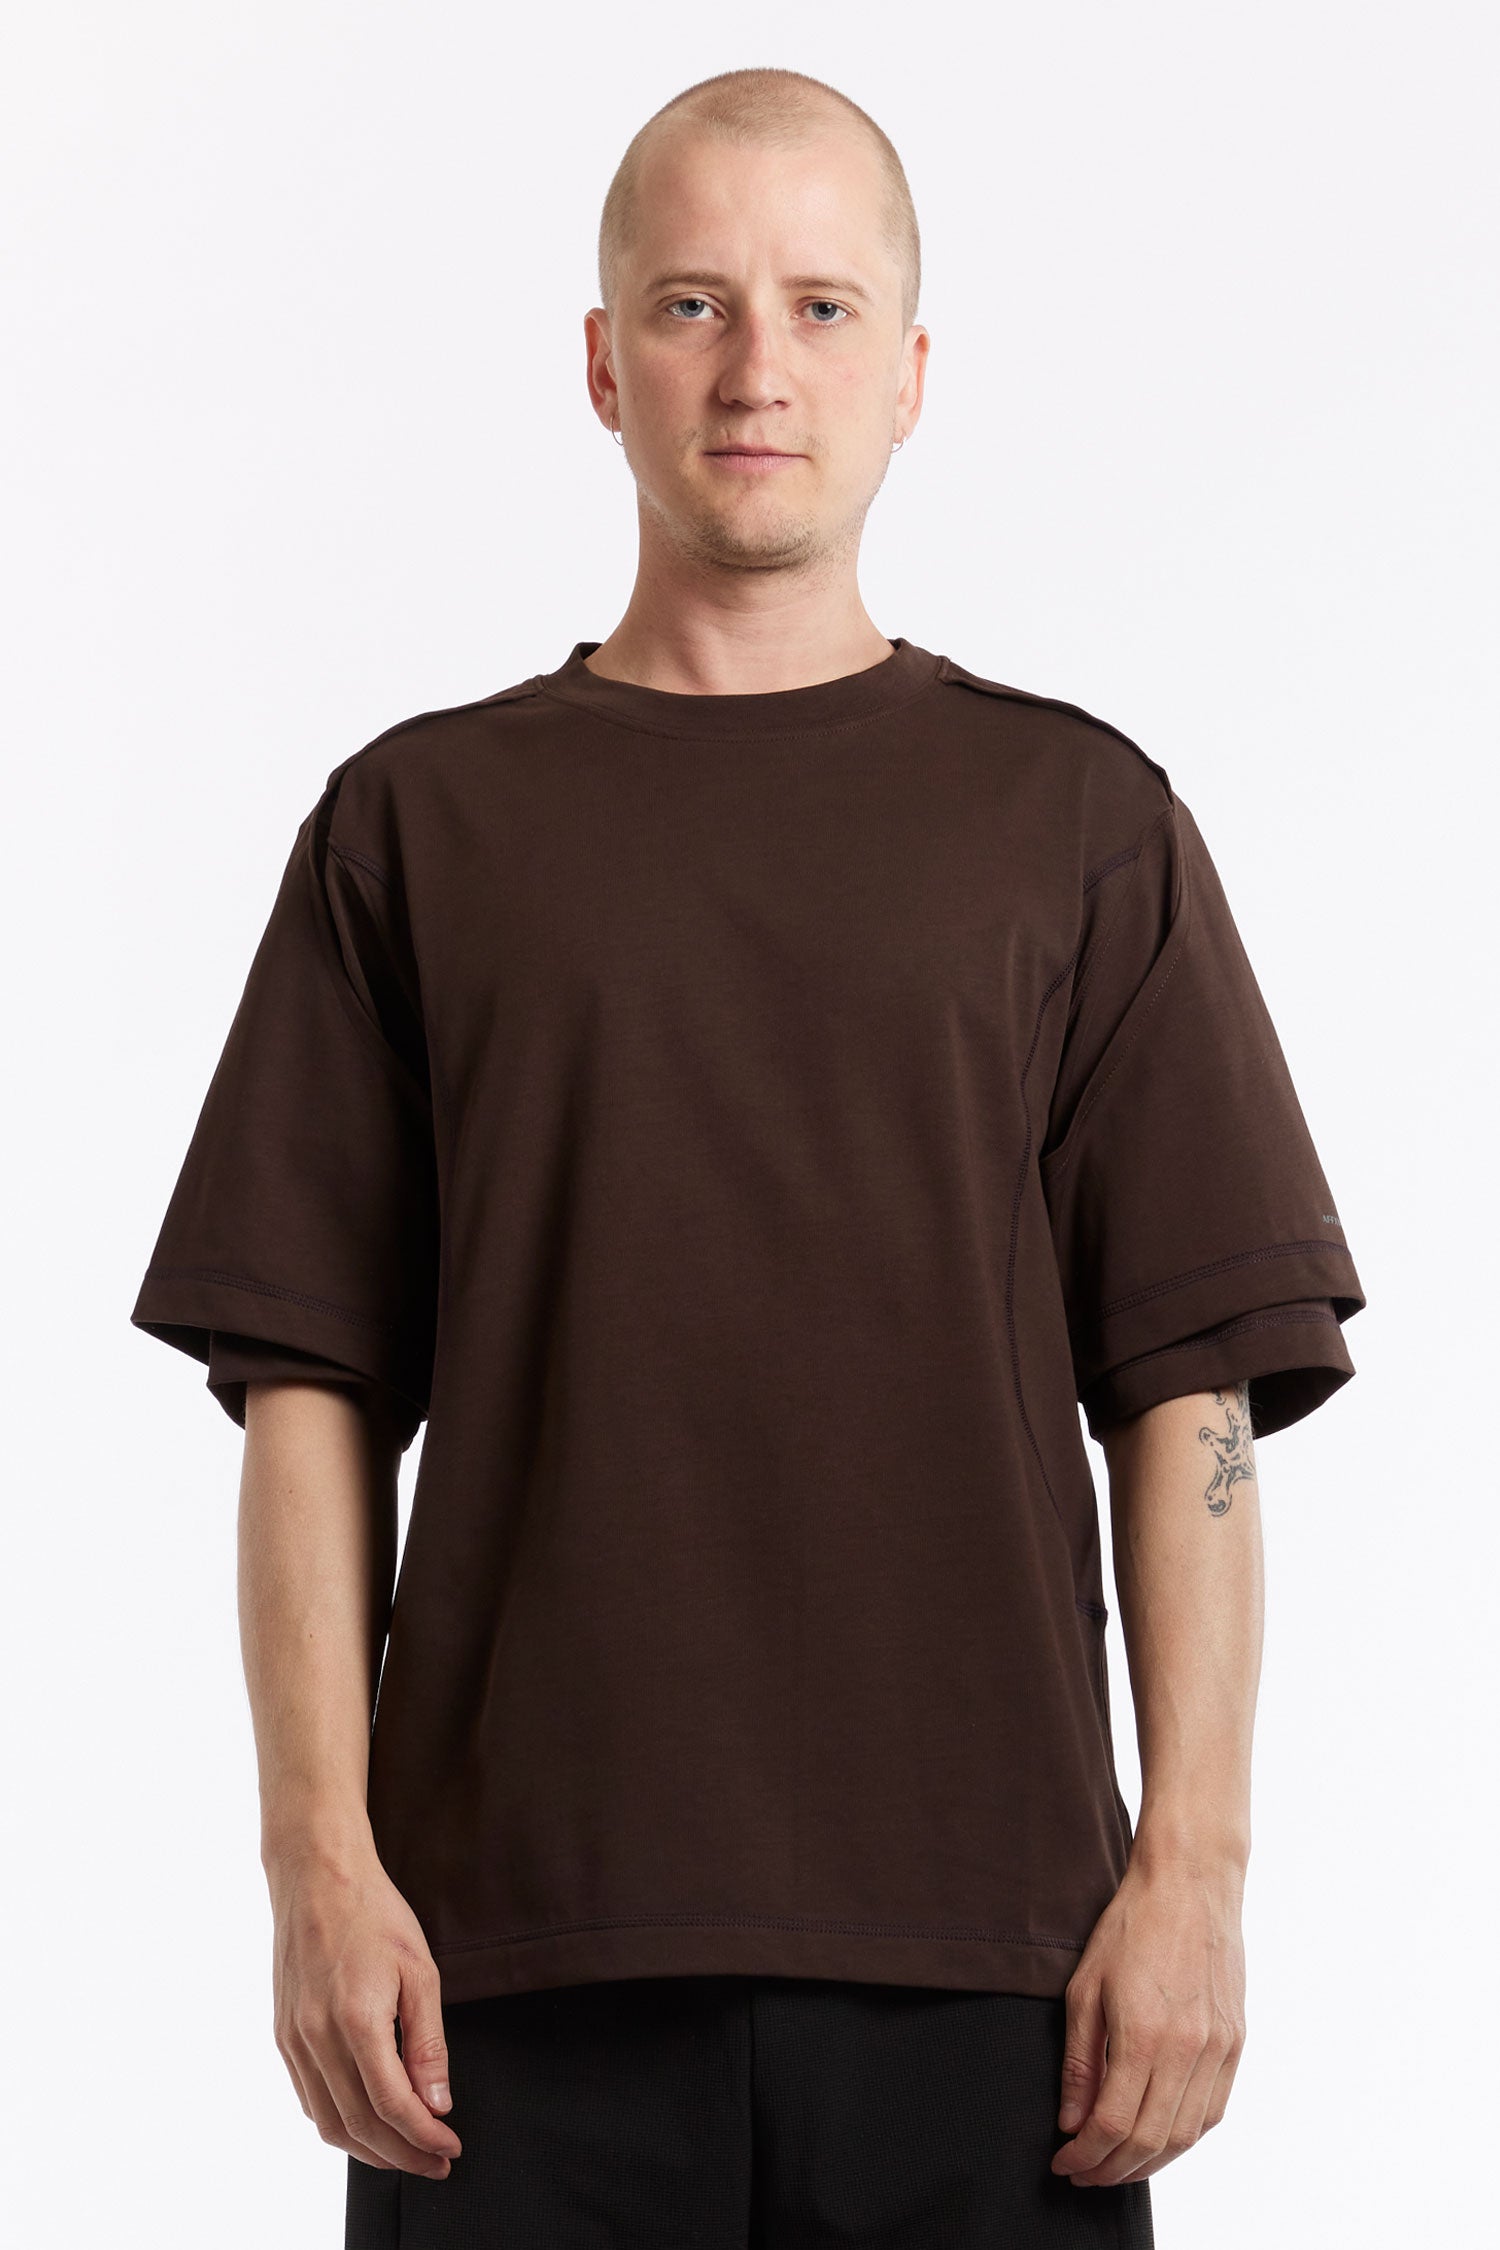 The AFFXWRKS - DUAL SLEEVE SS TEE  available online with global shipping, and in PAM Stores Melbourne and Sydney.